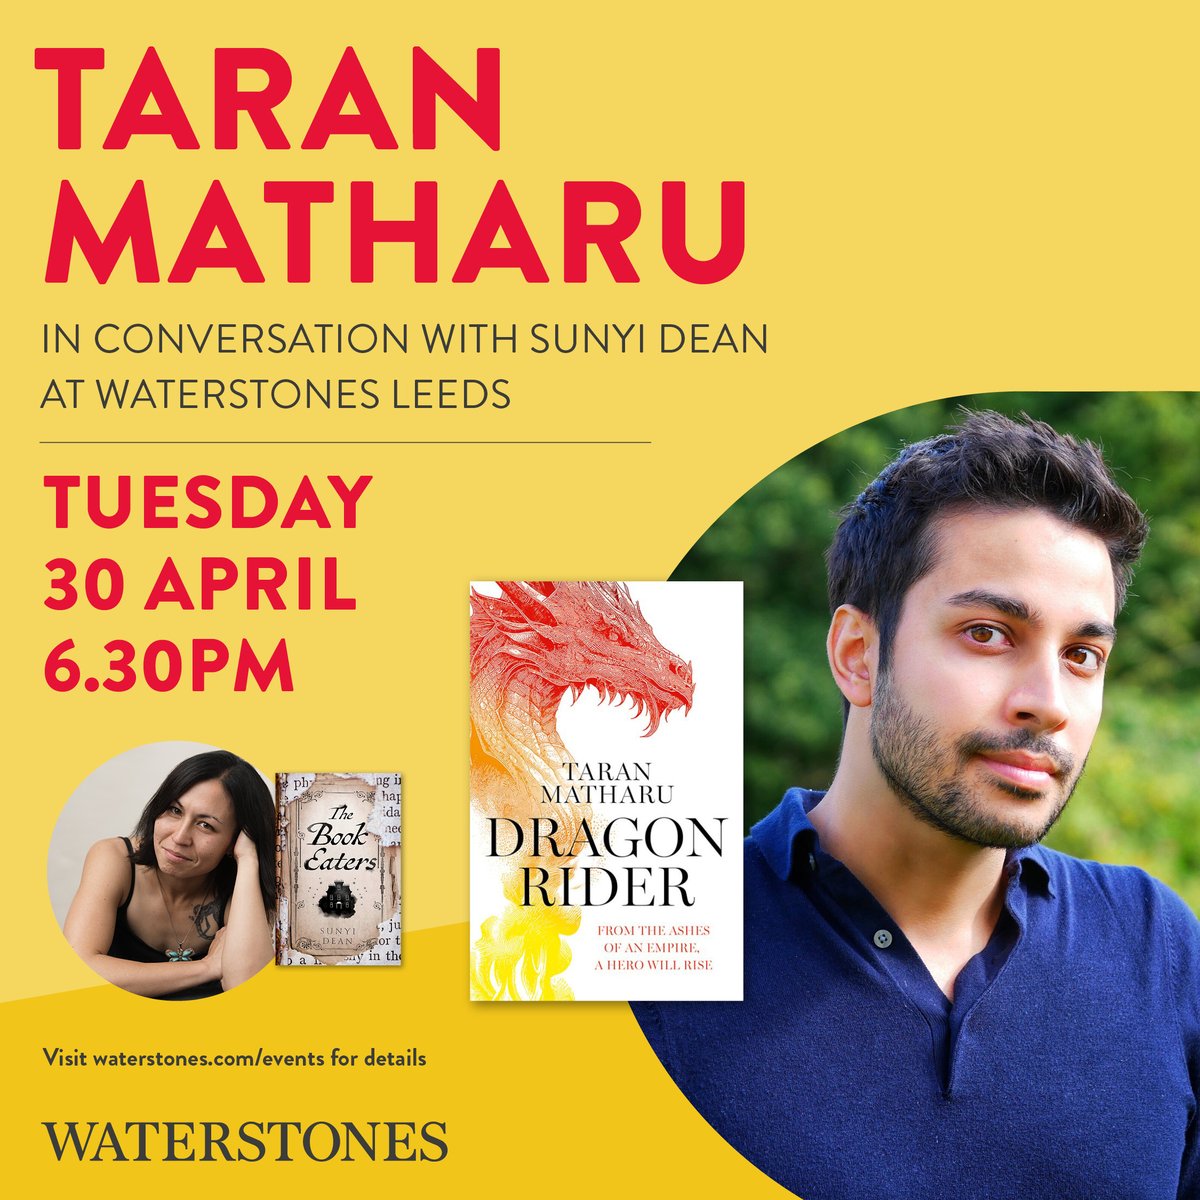 Don't miss out on these upcoming events with @TaranMatharu1, author of DRAGON RIDER! Tickets available from the links in our bio 🎫 #HarperVoyager #HarperVoyagerUK #FantasyEvents #FantasyBooks #FantasyWriters #DragonBooks @waterstonesyeo @WstonesLeeds @WaterstonesTraf